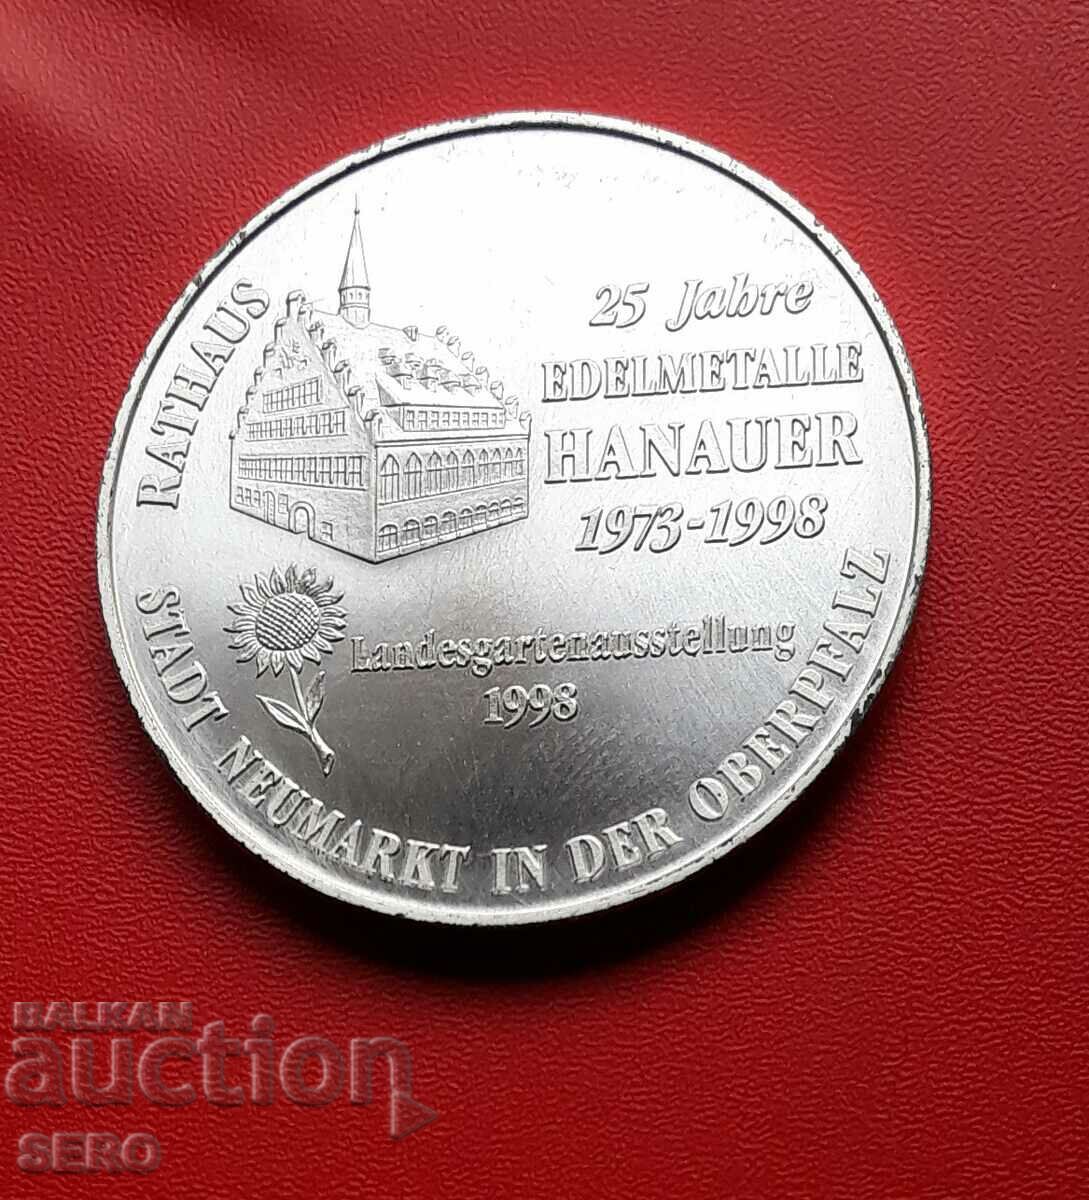 Germany-plaque-25 years auction. with precious metals in Neumarkt